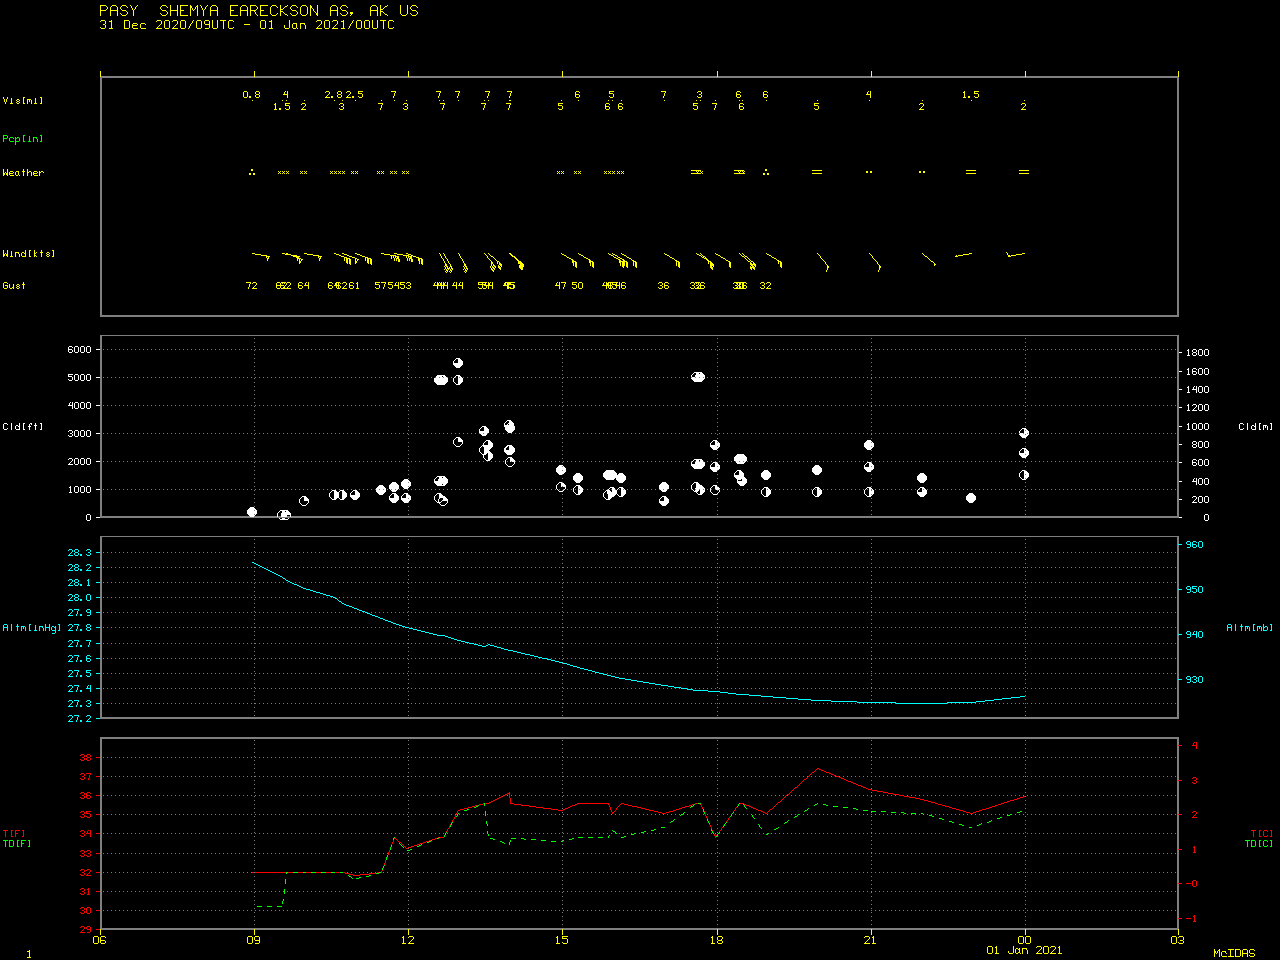 Plot of surface report data from Shemya [click to enlarge]